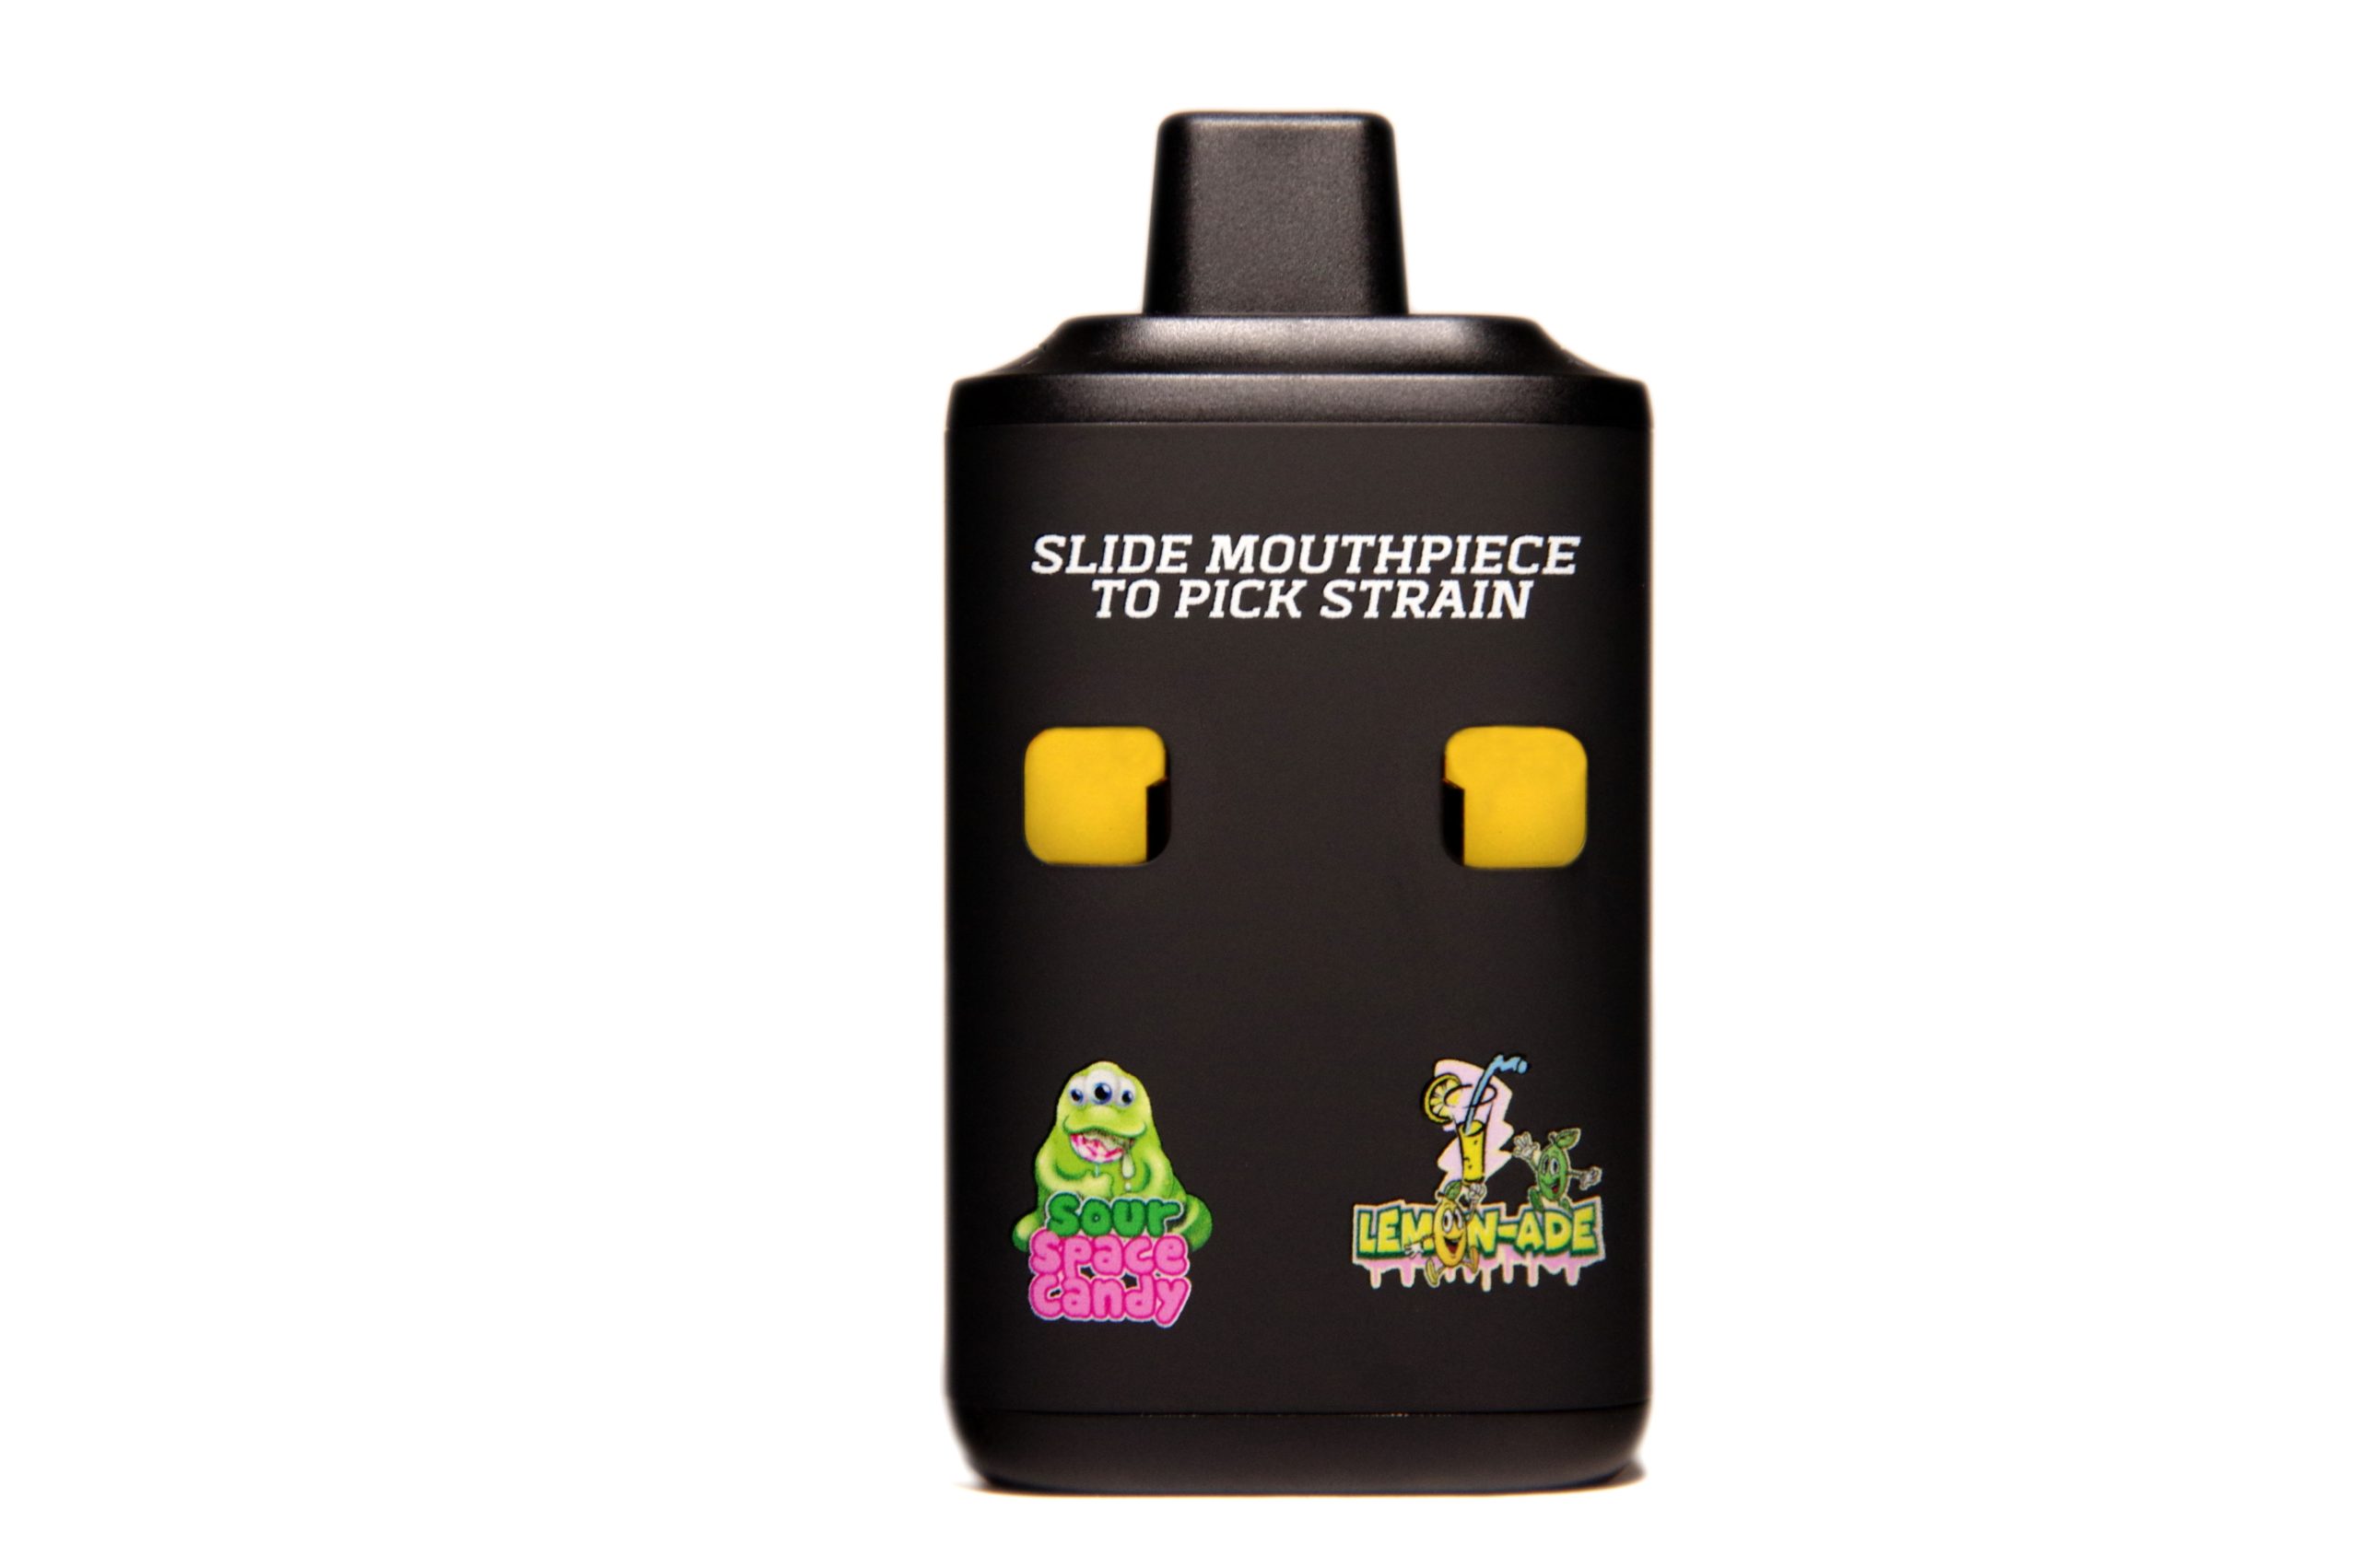 Buy Straight Goods – Dual Chamber Vape – Sour Space Candy + Lemon-Ade (3G + 3G) online Canada